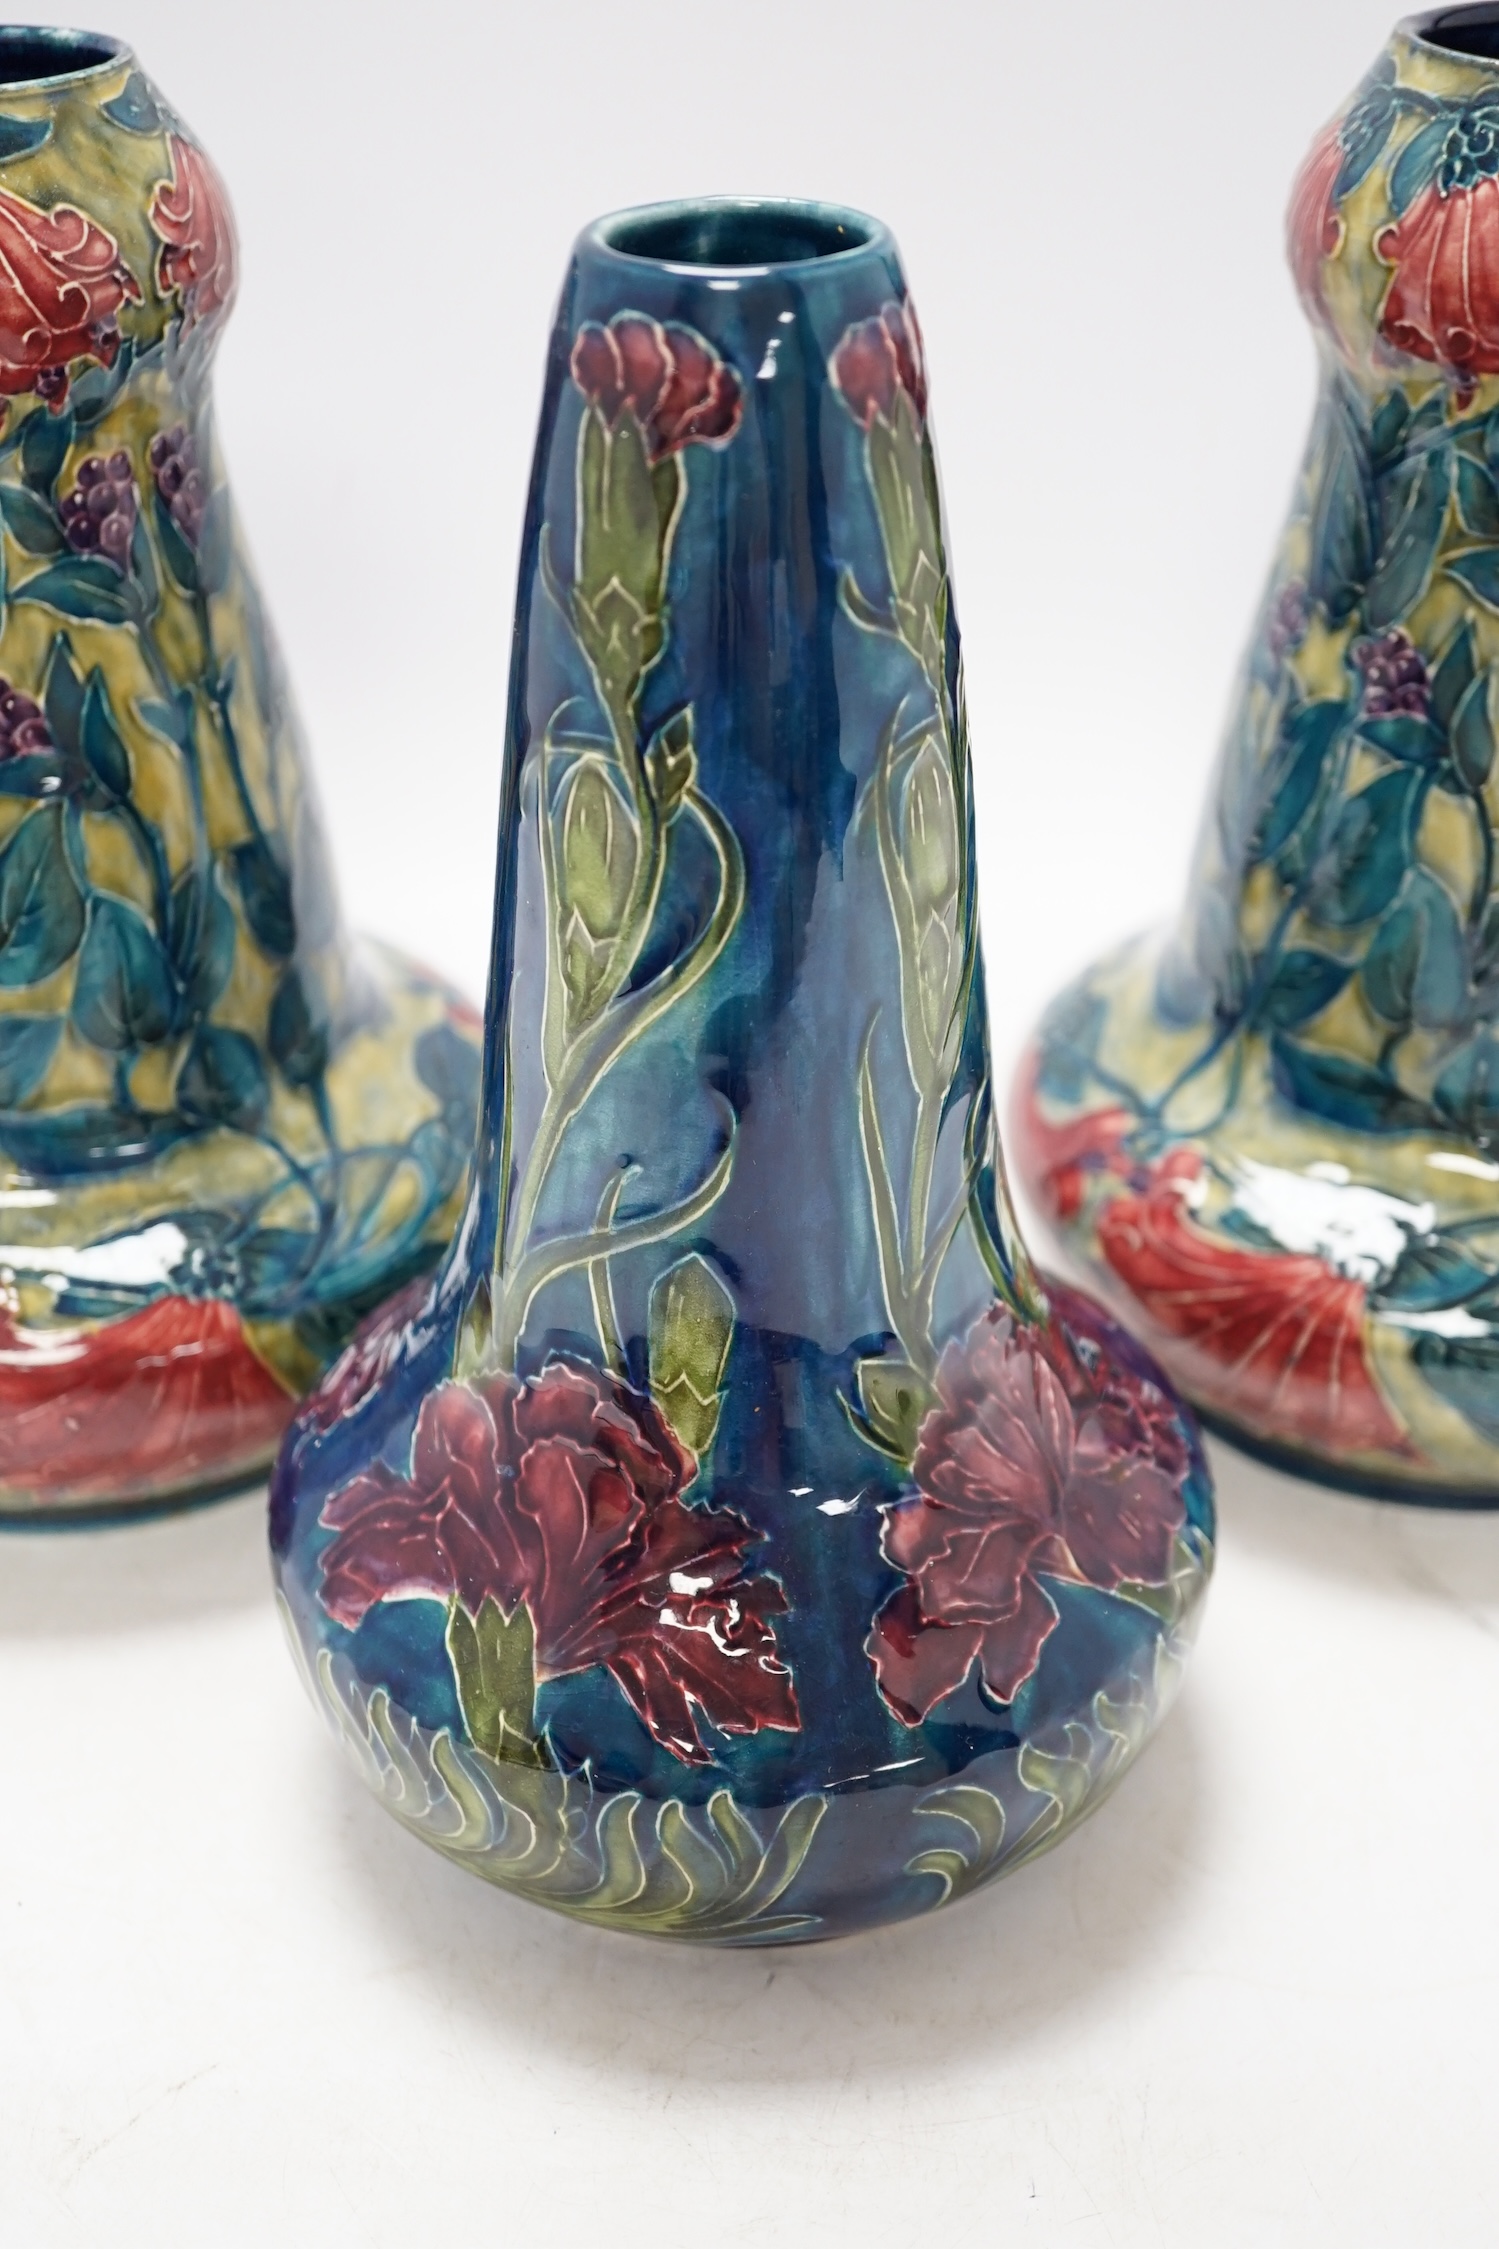 A pair of Hancock & Sons Morrisware vases, and another, designed by George Cartlidge, decorated with stylised flowers, 24cm high. Condition - fair to good, crazing throughout